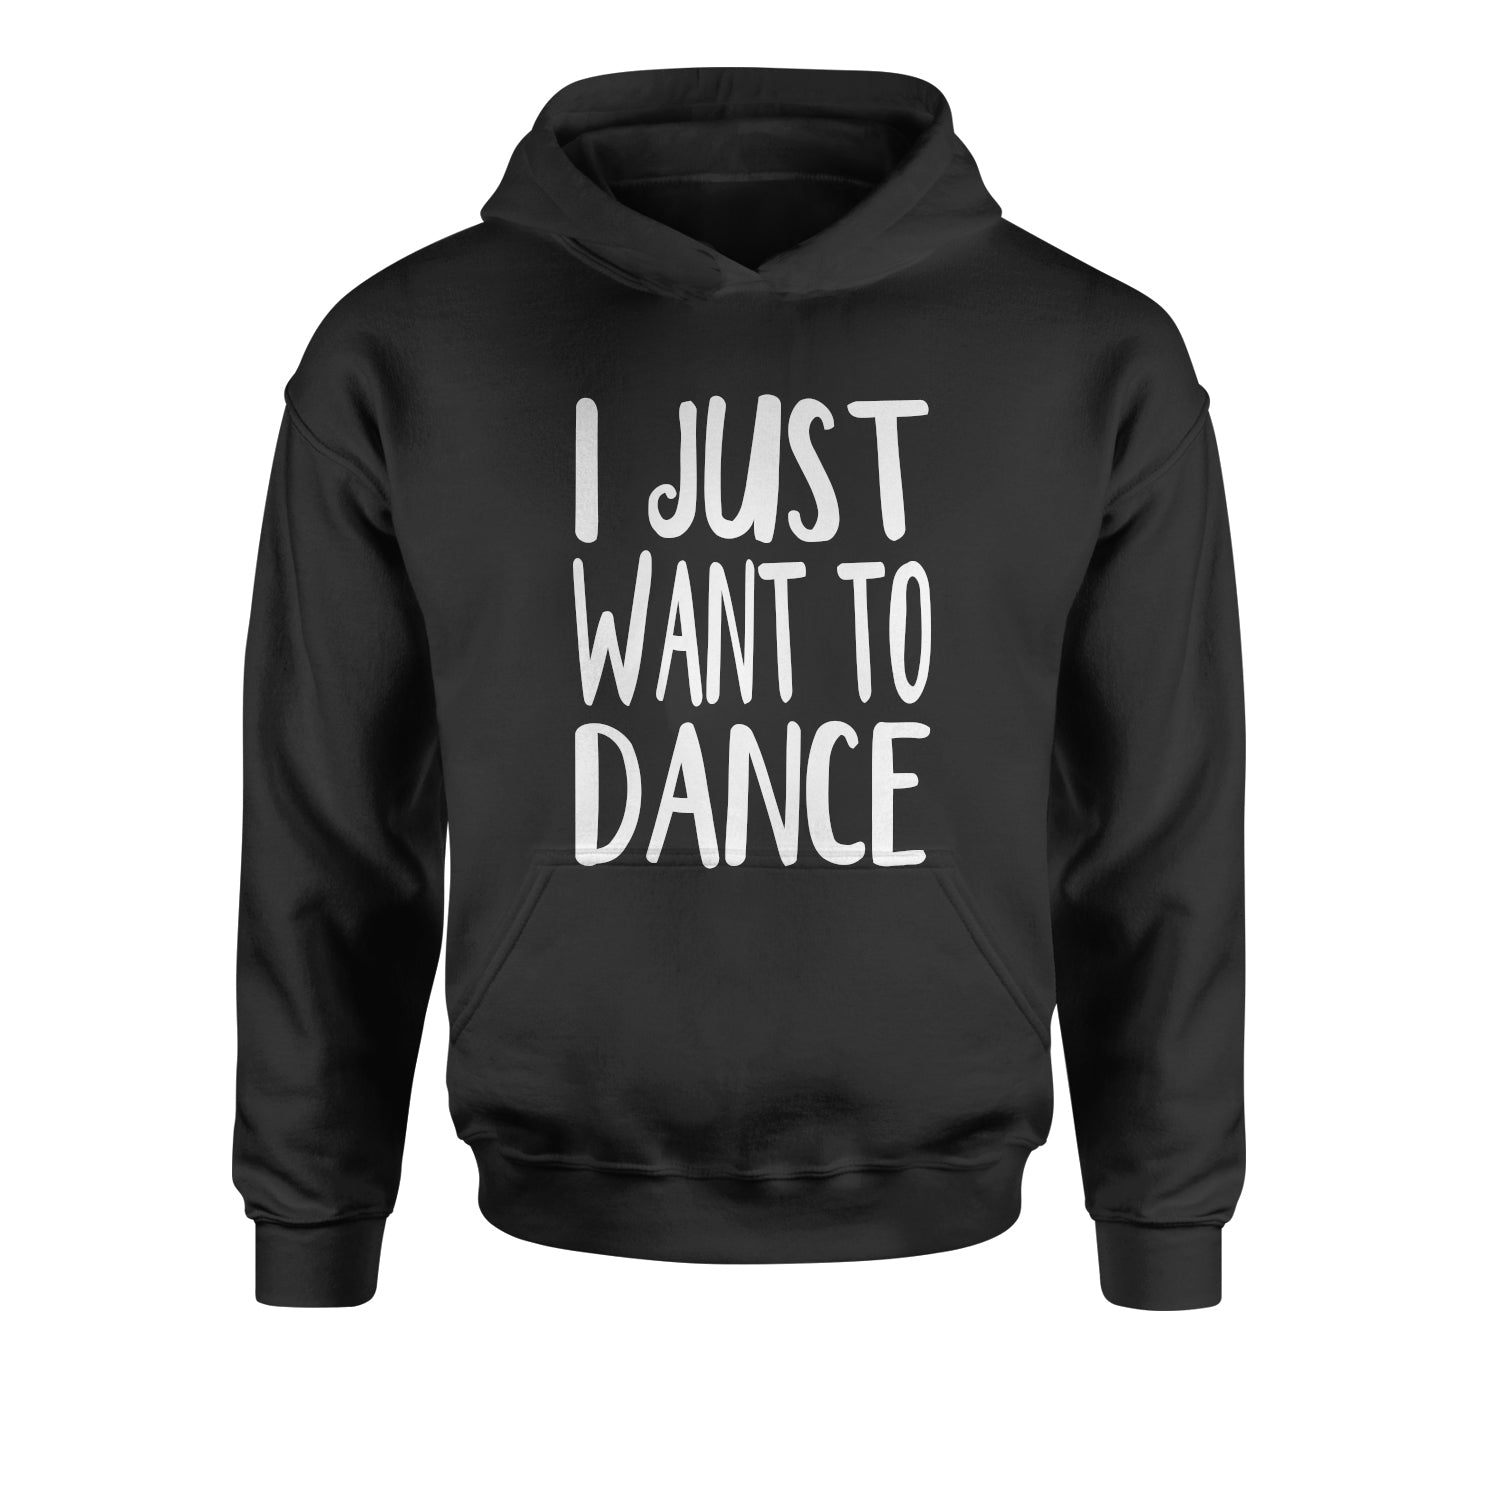 I Just Want To Dance Youth-Sized Hoodie boomerang, dancing, jo, jojo, youth-sized by Expression Tees